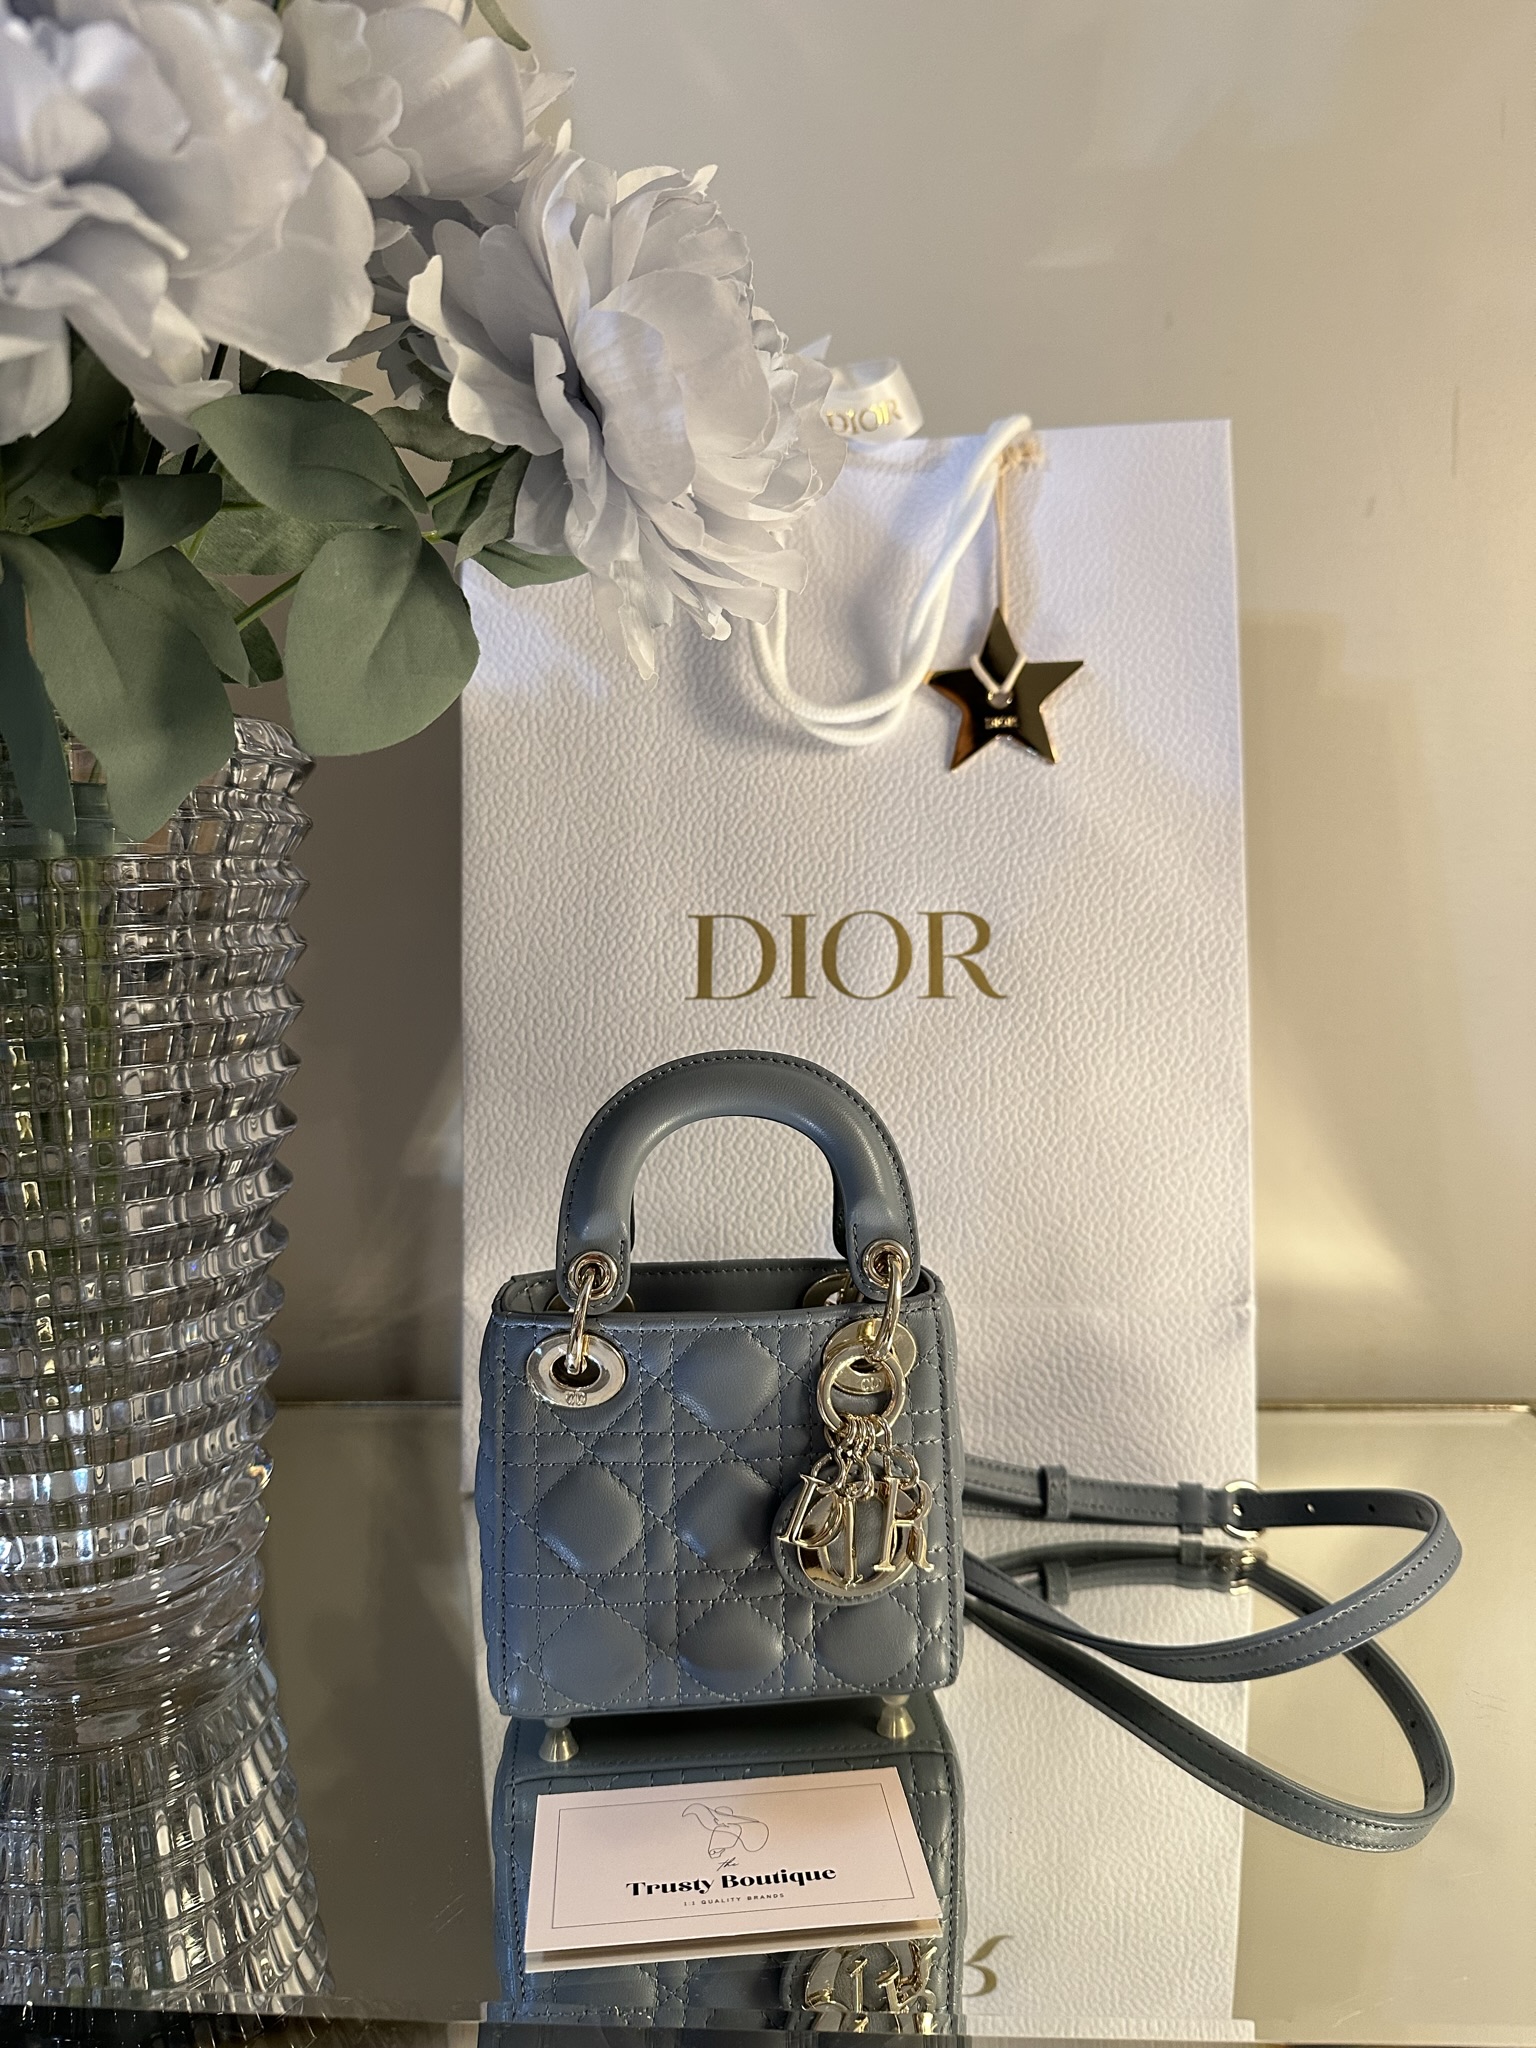 Dior - Small Lady Dior My ABC Bag Rose des Vents Cannage Calfskin with Diamond Motif - Women